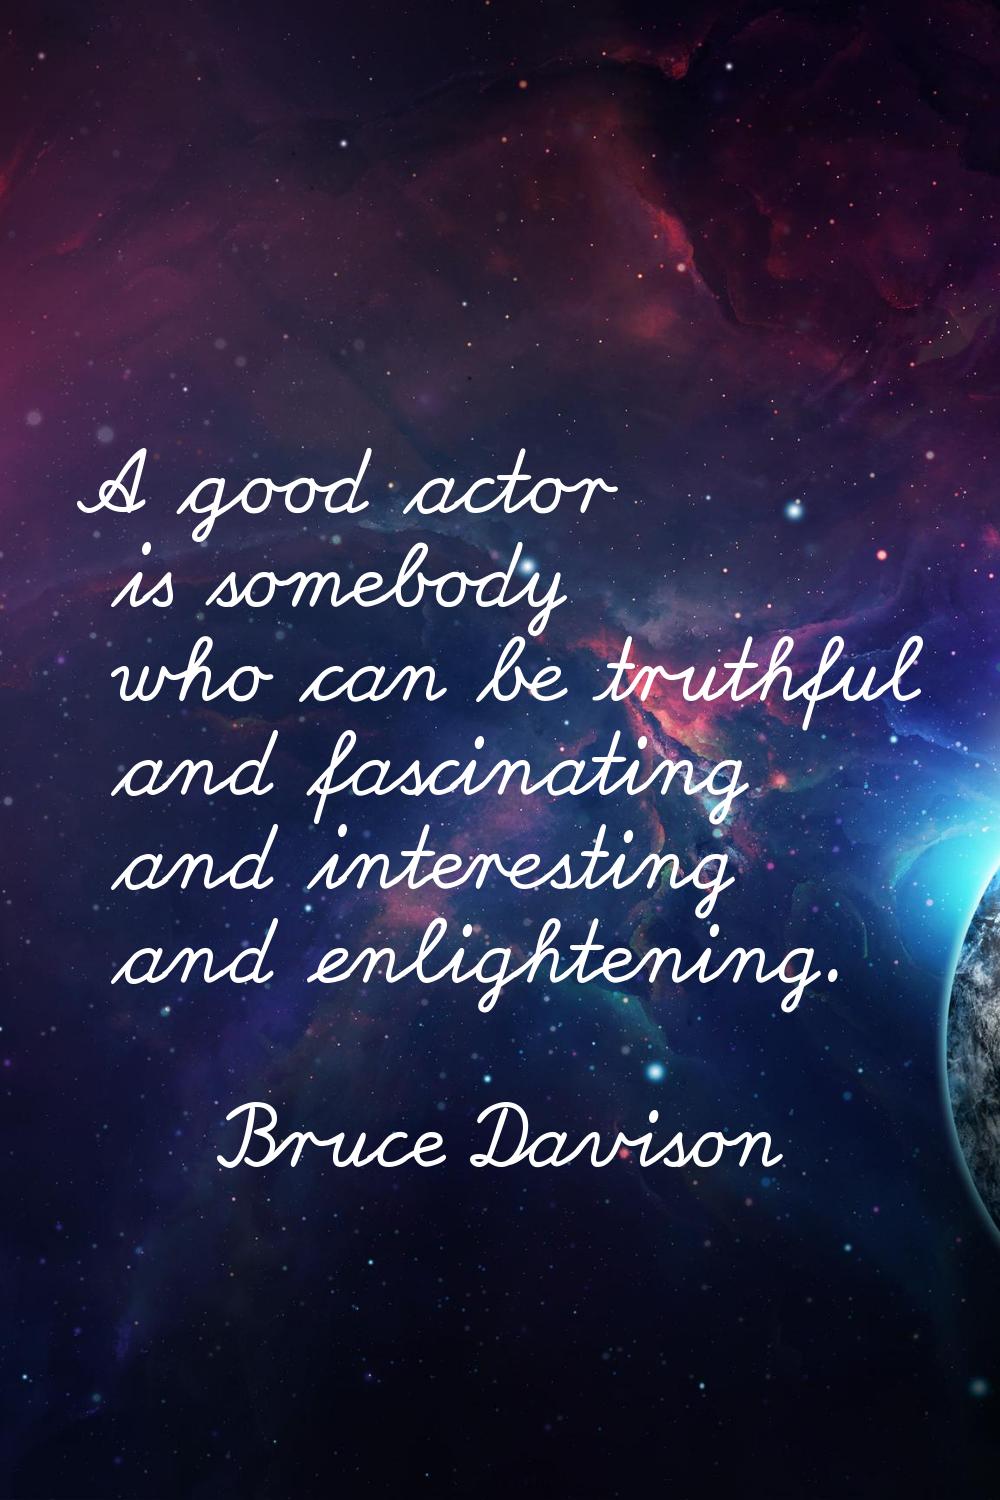 A good actor is somebody who can be truthful and fascinating and interesting and enlightening.